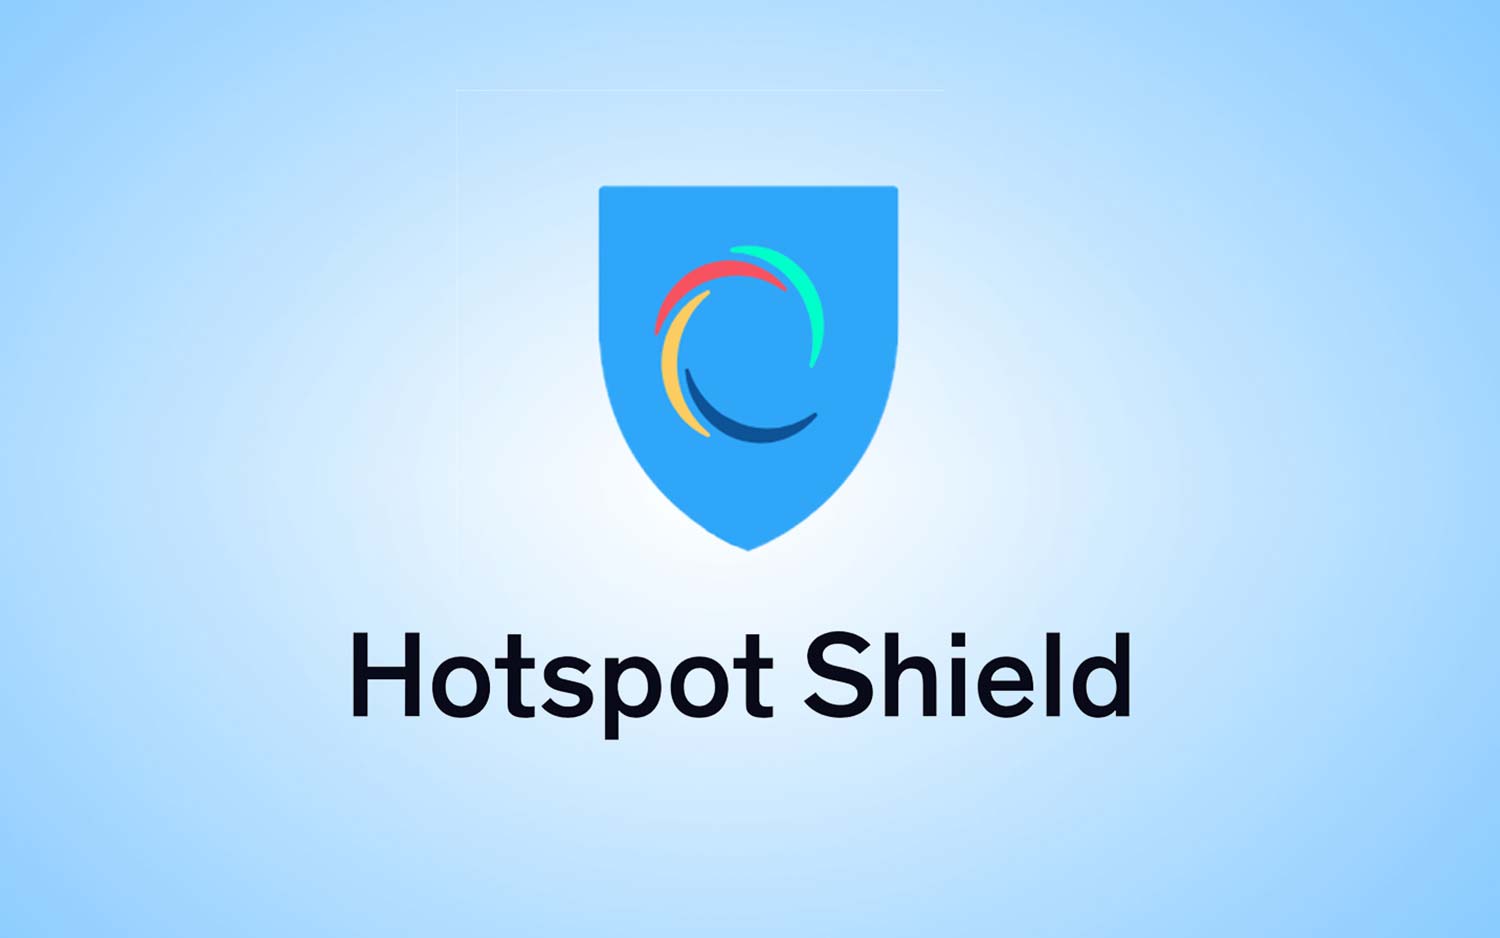 Hotspot Shield Free VPN - Full Review and Benchmarks | Tom's Guide